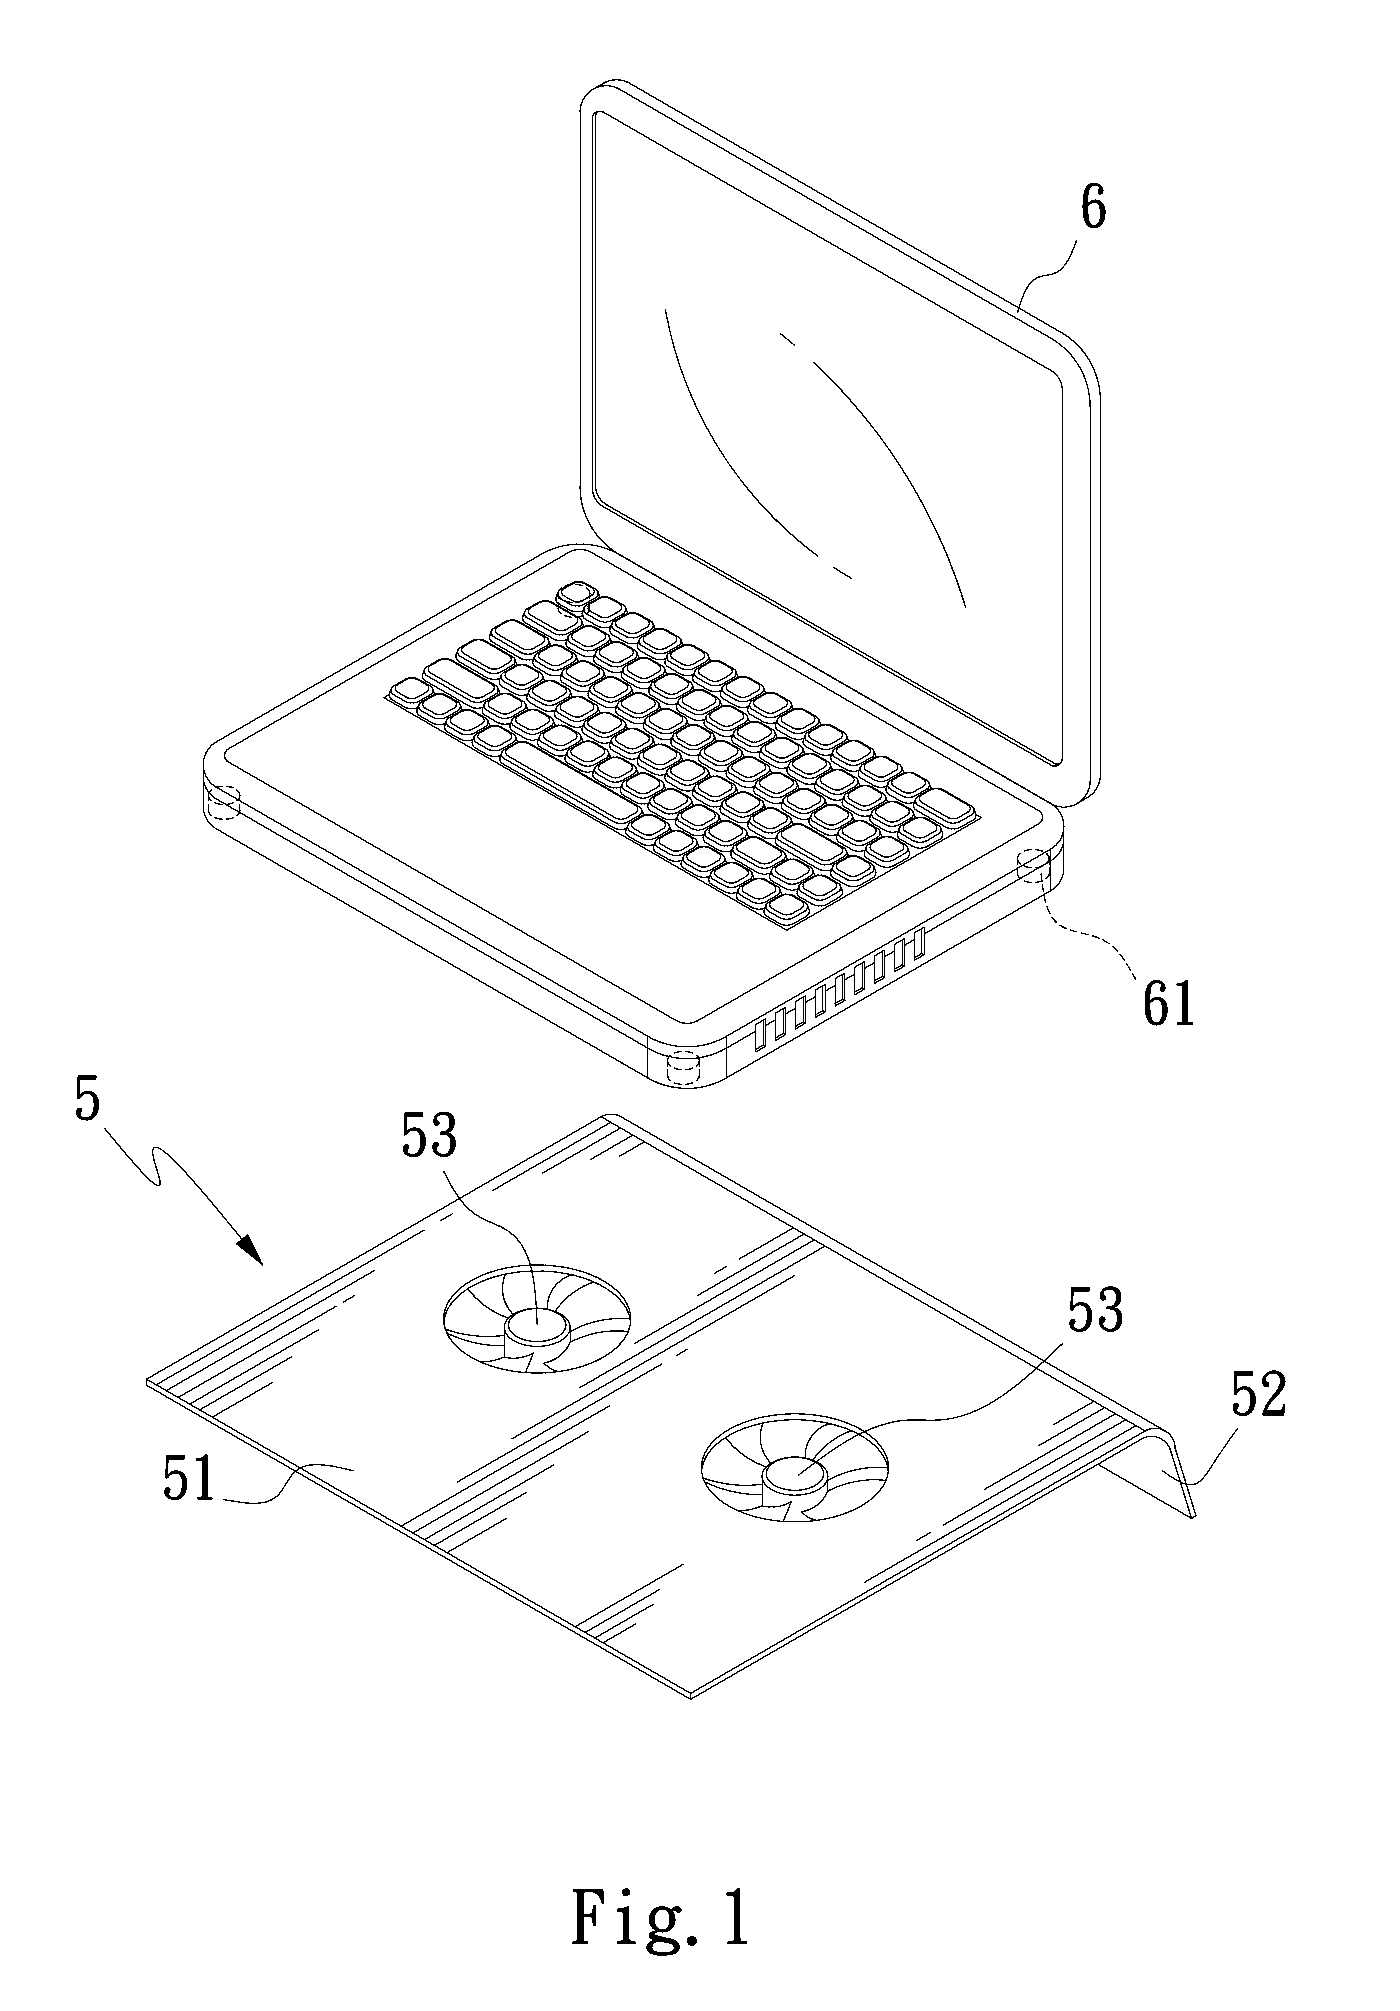 Heat dissipating pad structure for notebook computer